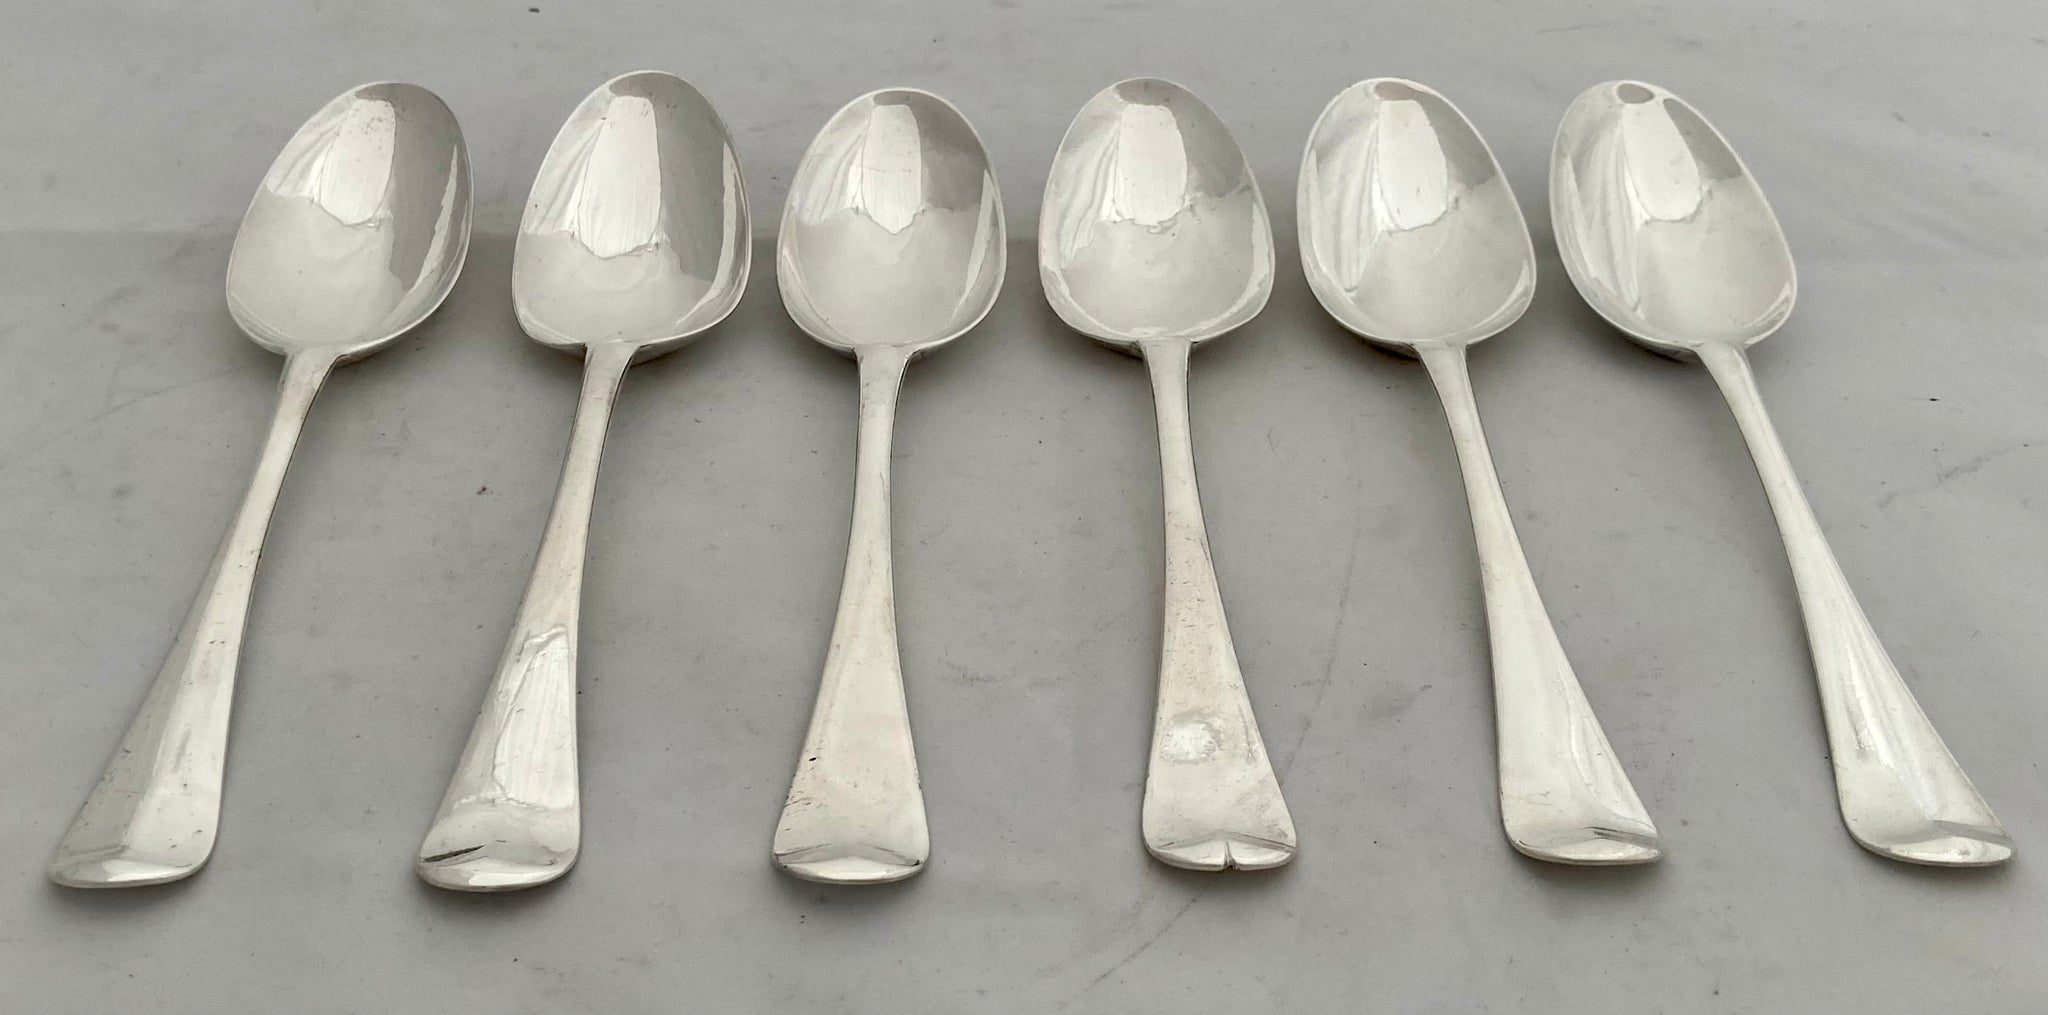 6 Silver-plated Table Spoons, Tablespoons by Bruckmann, Swabian Pattern 